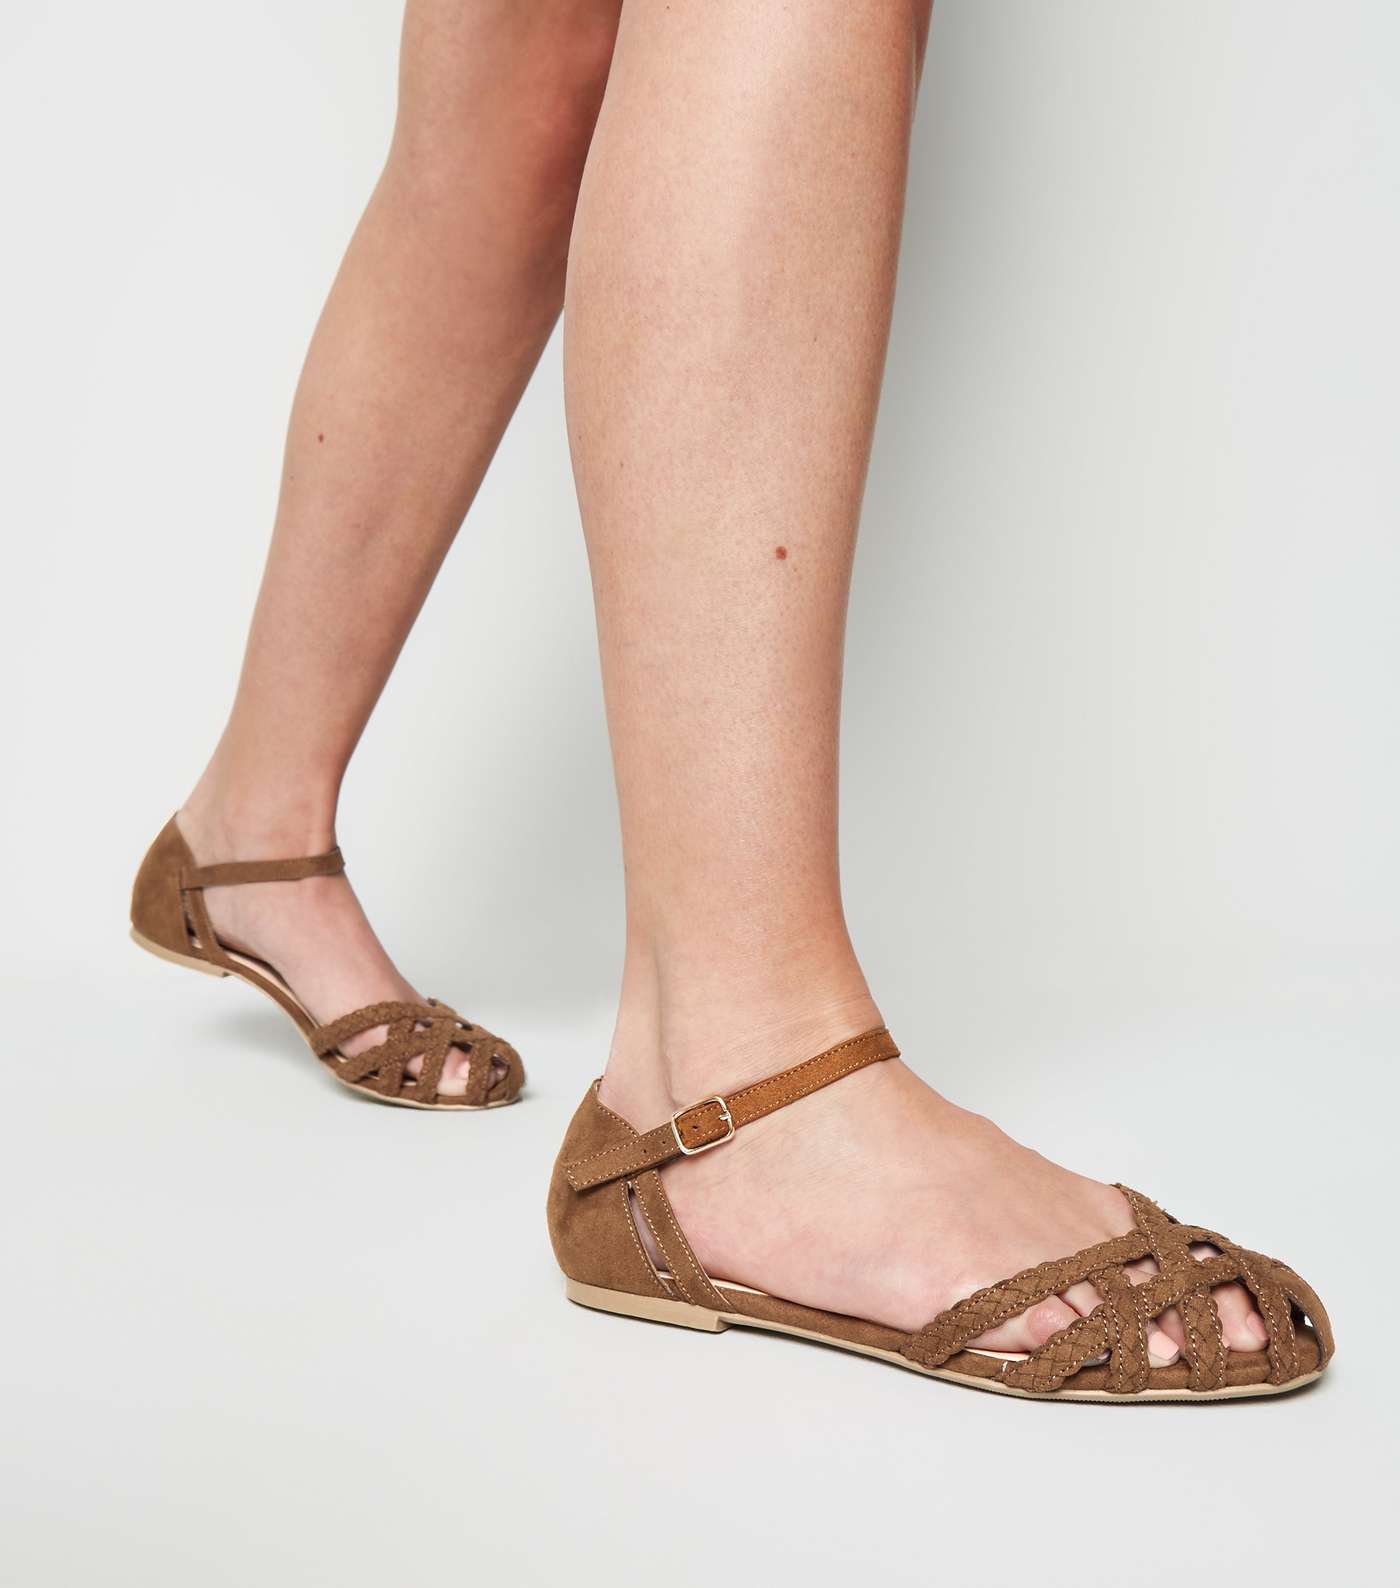 Wide Fit Tan Plait Strappy Caged Sandals Image 2